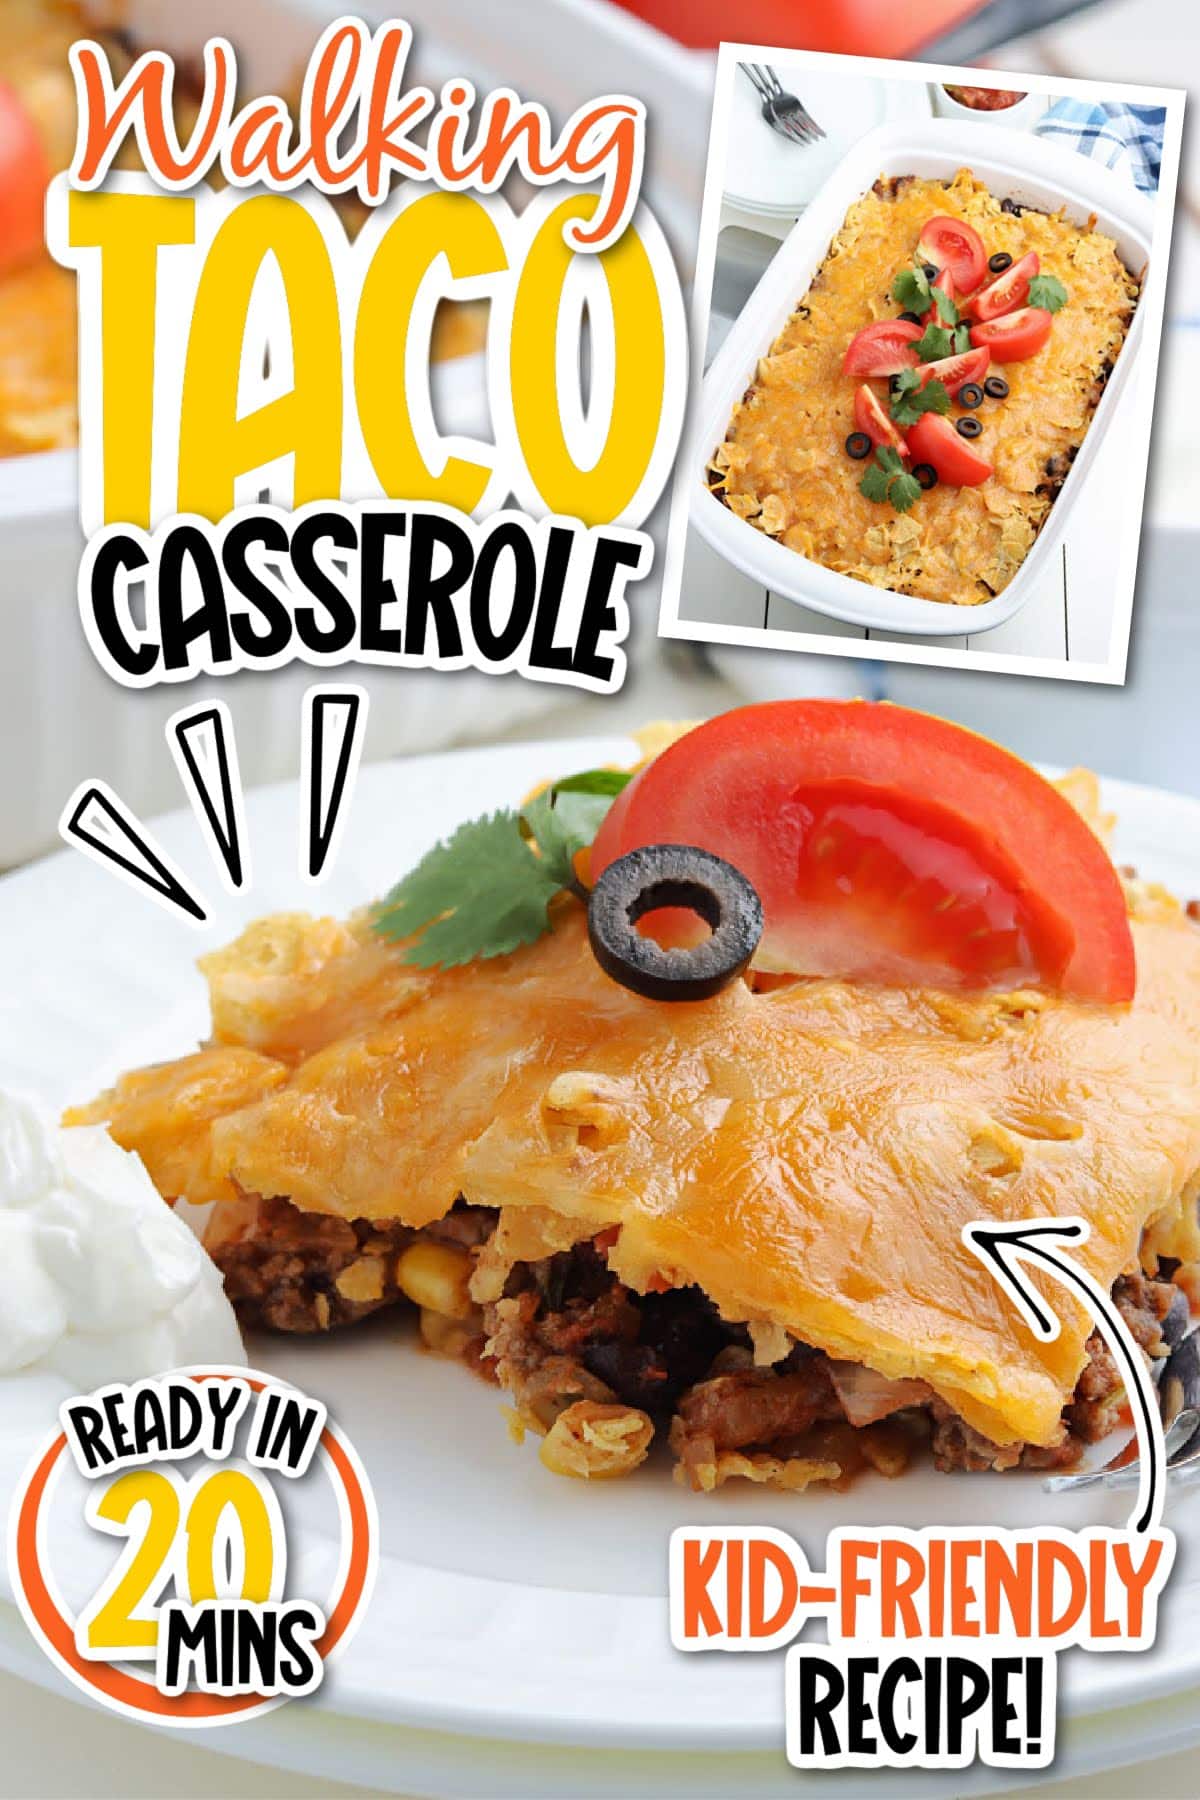 Two photo collage of a slice of walking taco casserole on a white plate garnished with tomato, olive, cilantro, and cream cheese and an image of the full casserole dish with text overlay.